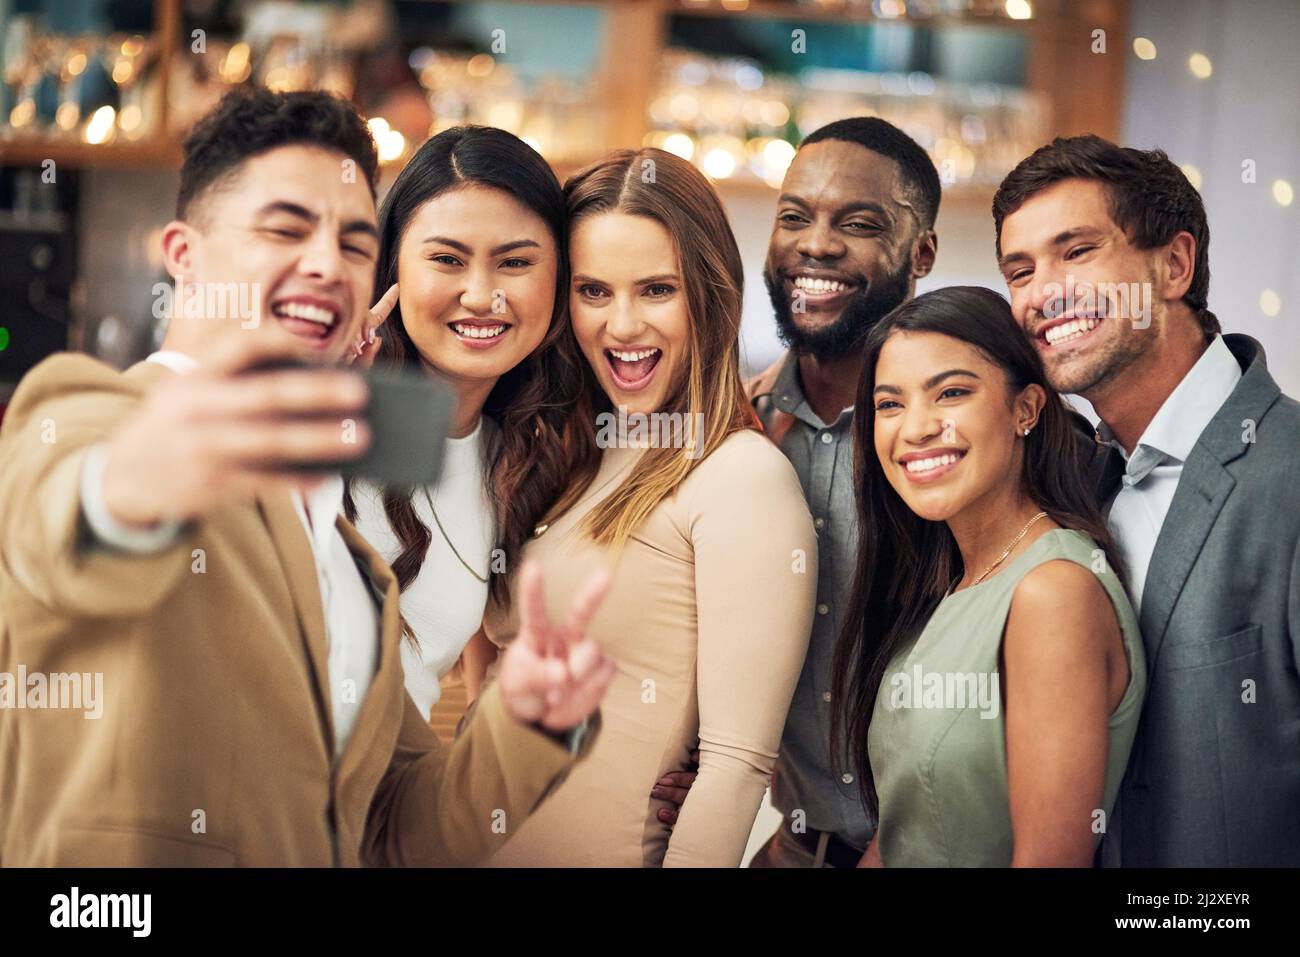 A quick selfie while the fun lasts. Cropped shot of a group of young friends posing for a selfie together in a bar. Stock Photo